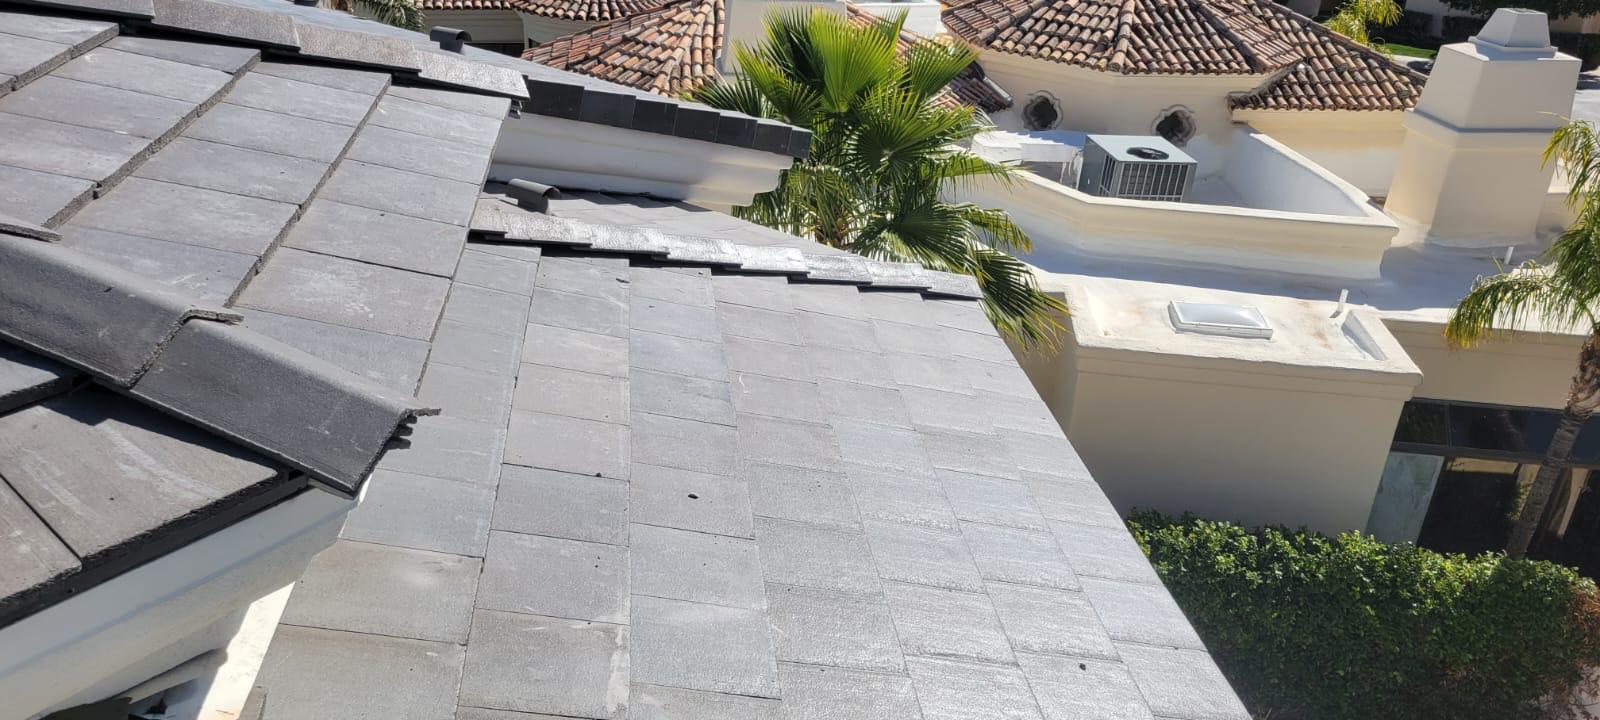 Metal tiles arranged for a tile re-roofing project in the Biltmore vicinity.